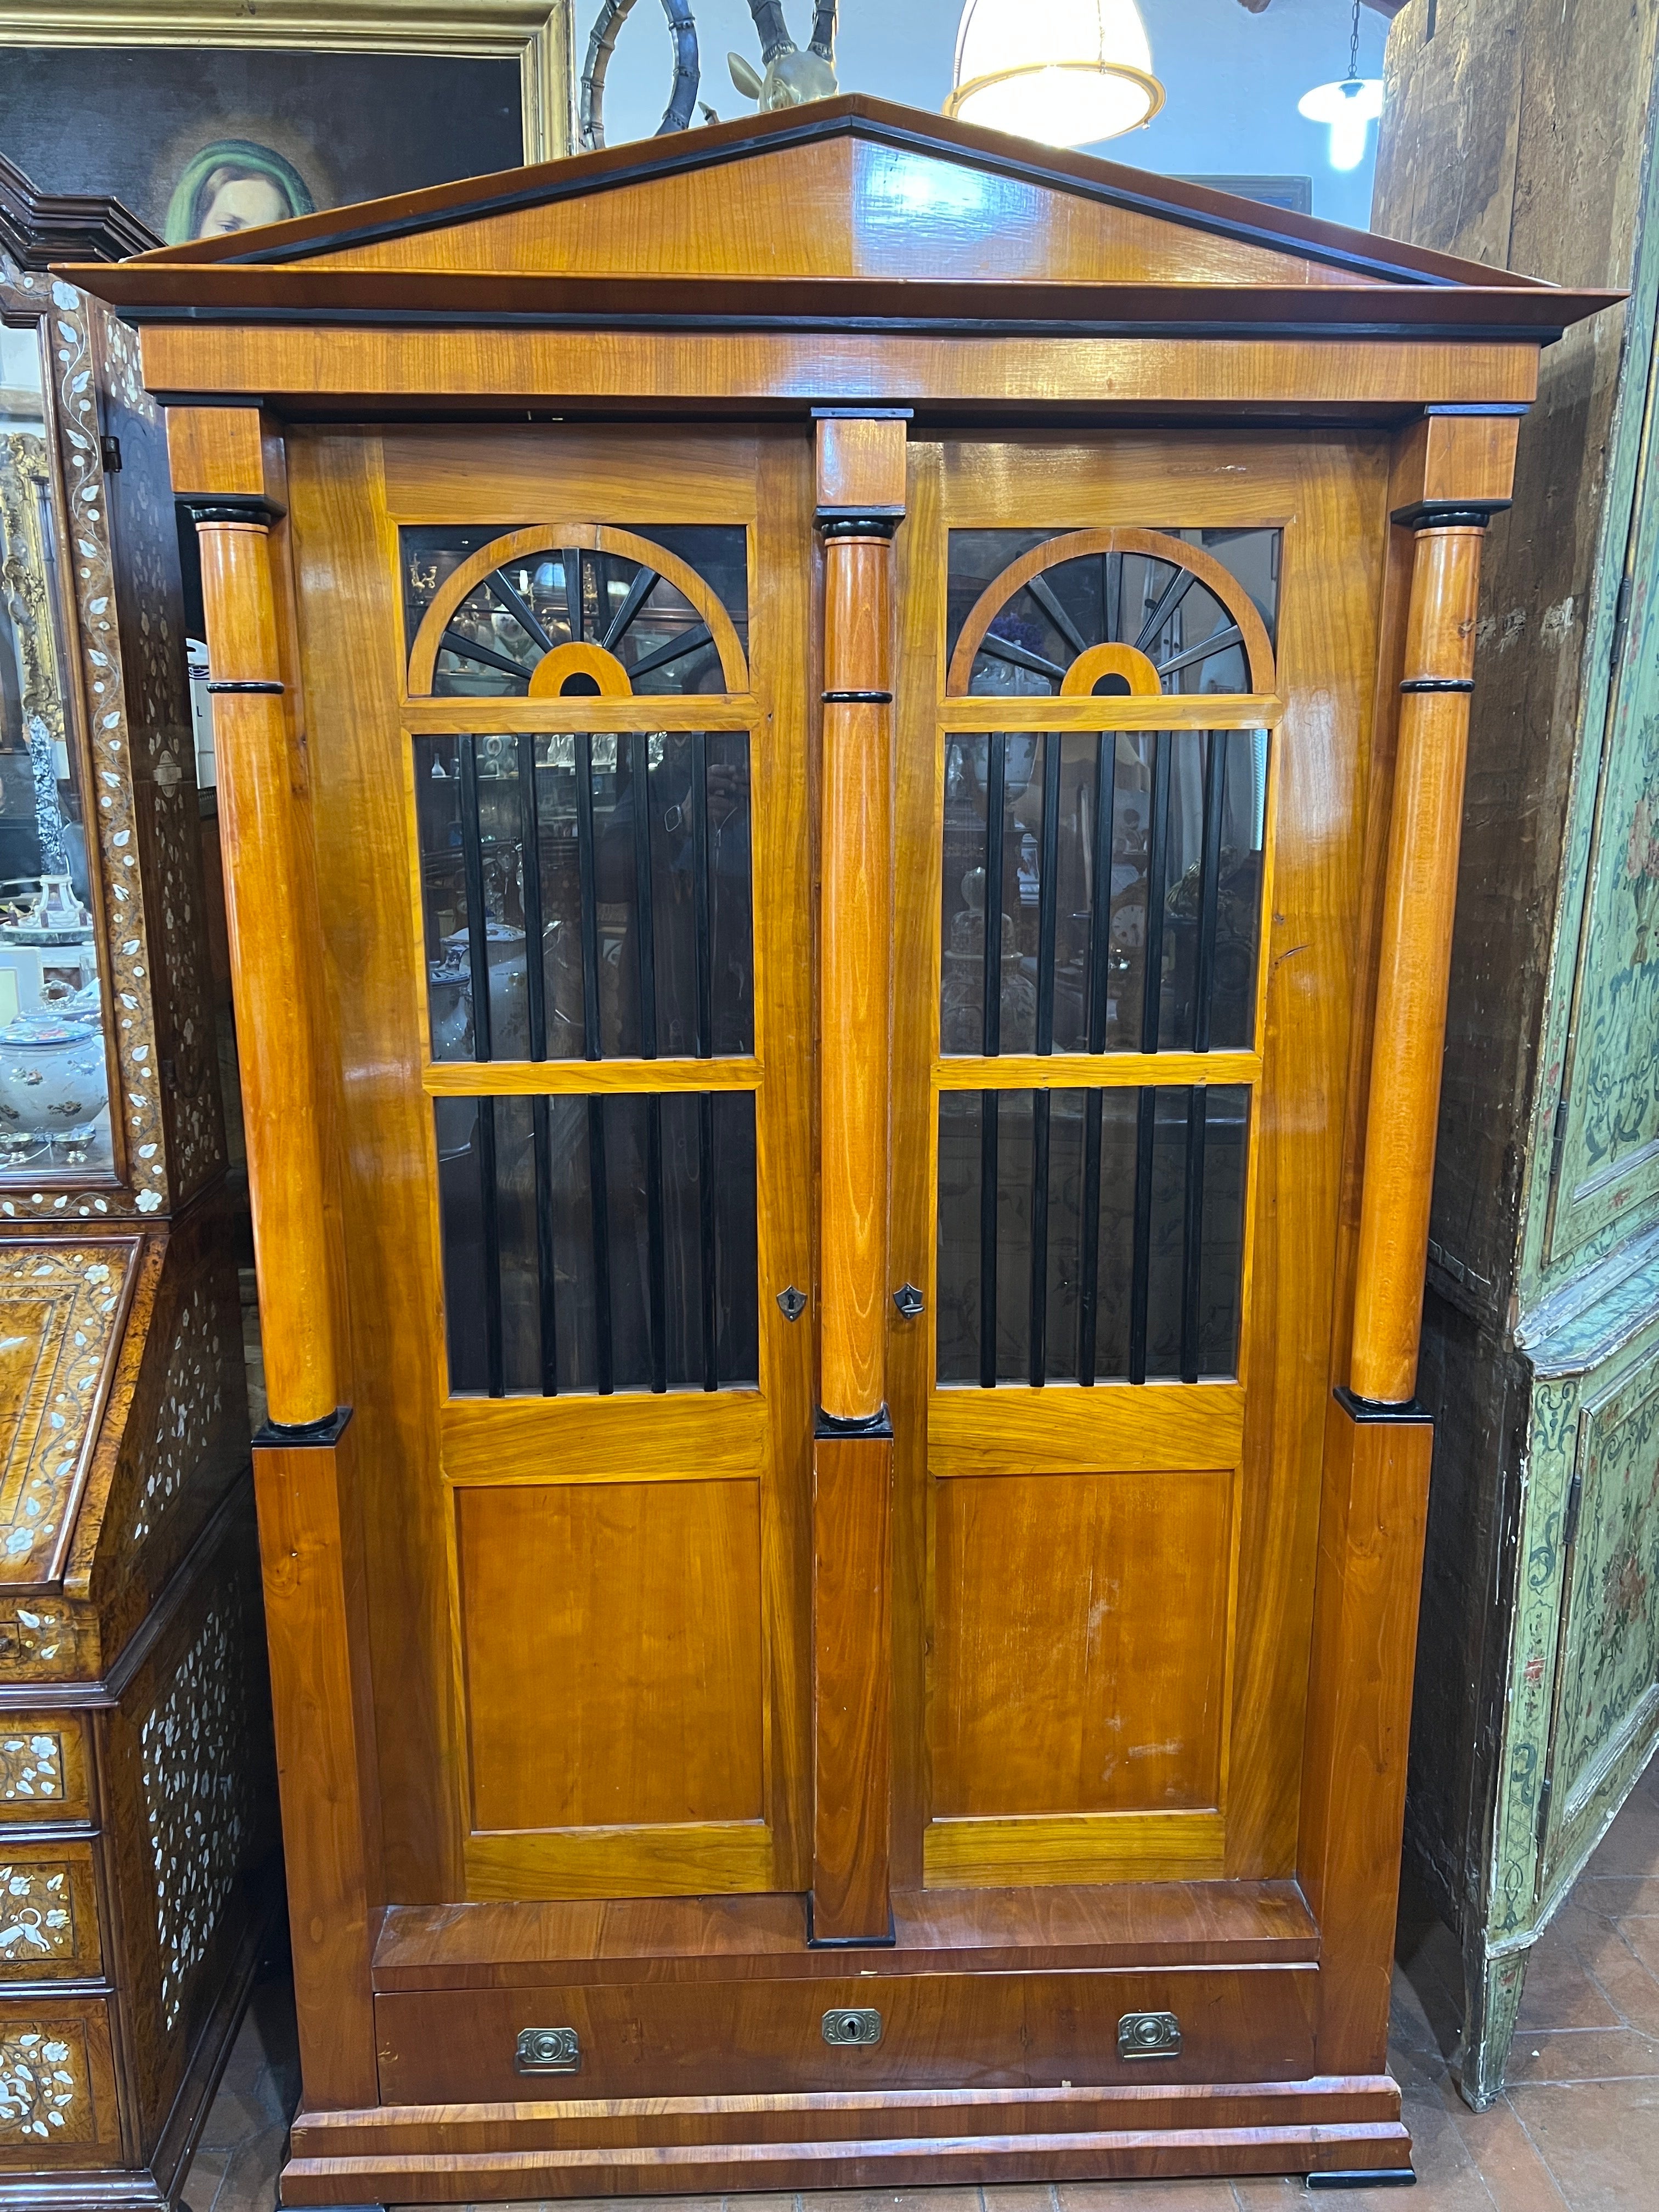 Fantastic two-door Vitrines cabinet of Austrian origin, early Biedermeier period ( 1815-1830), architectural form with a gable cap, giving the idea of the entrance to a Greek temple. Made of fir wood and plated with cherry wood, ebonized parts on